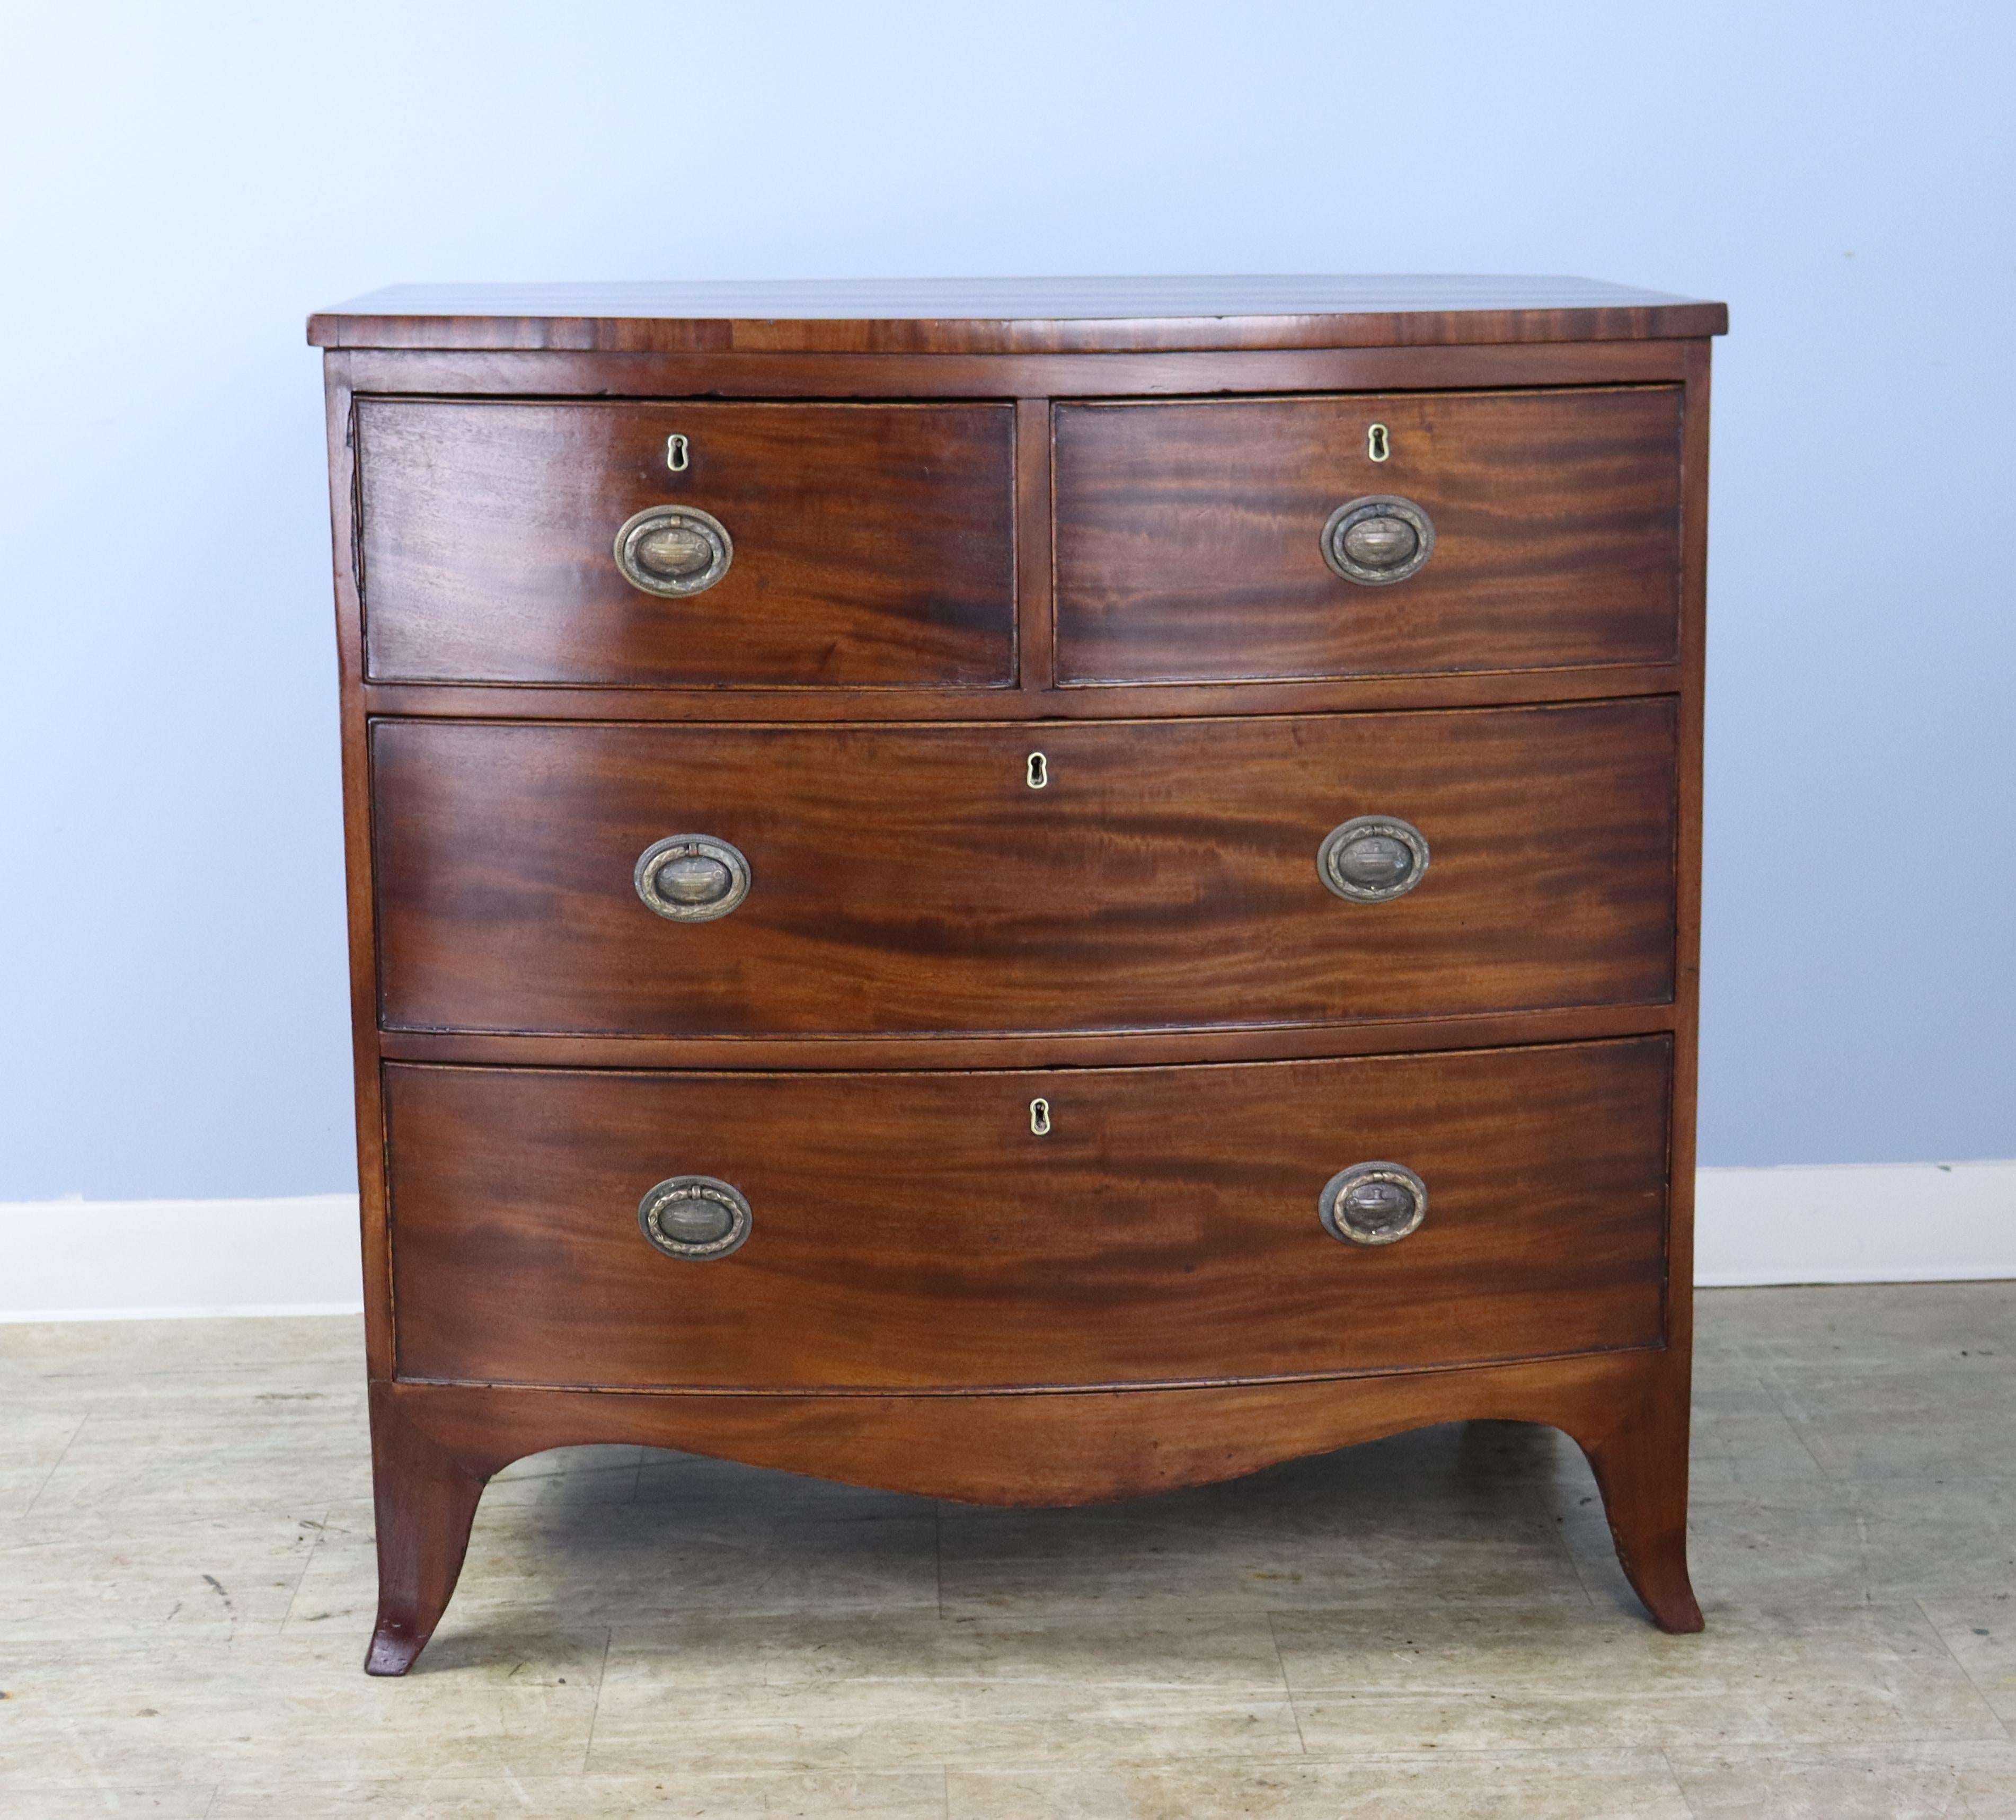 An elegant smaller antique bowfront bureau. The mahogany is a rich medium color with a lovely grain. Details of note include the cockbeading on the drawers, and beautifully wrought brass drawer pulls. The graceful French style feet are original.